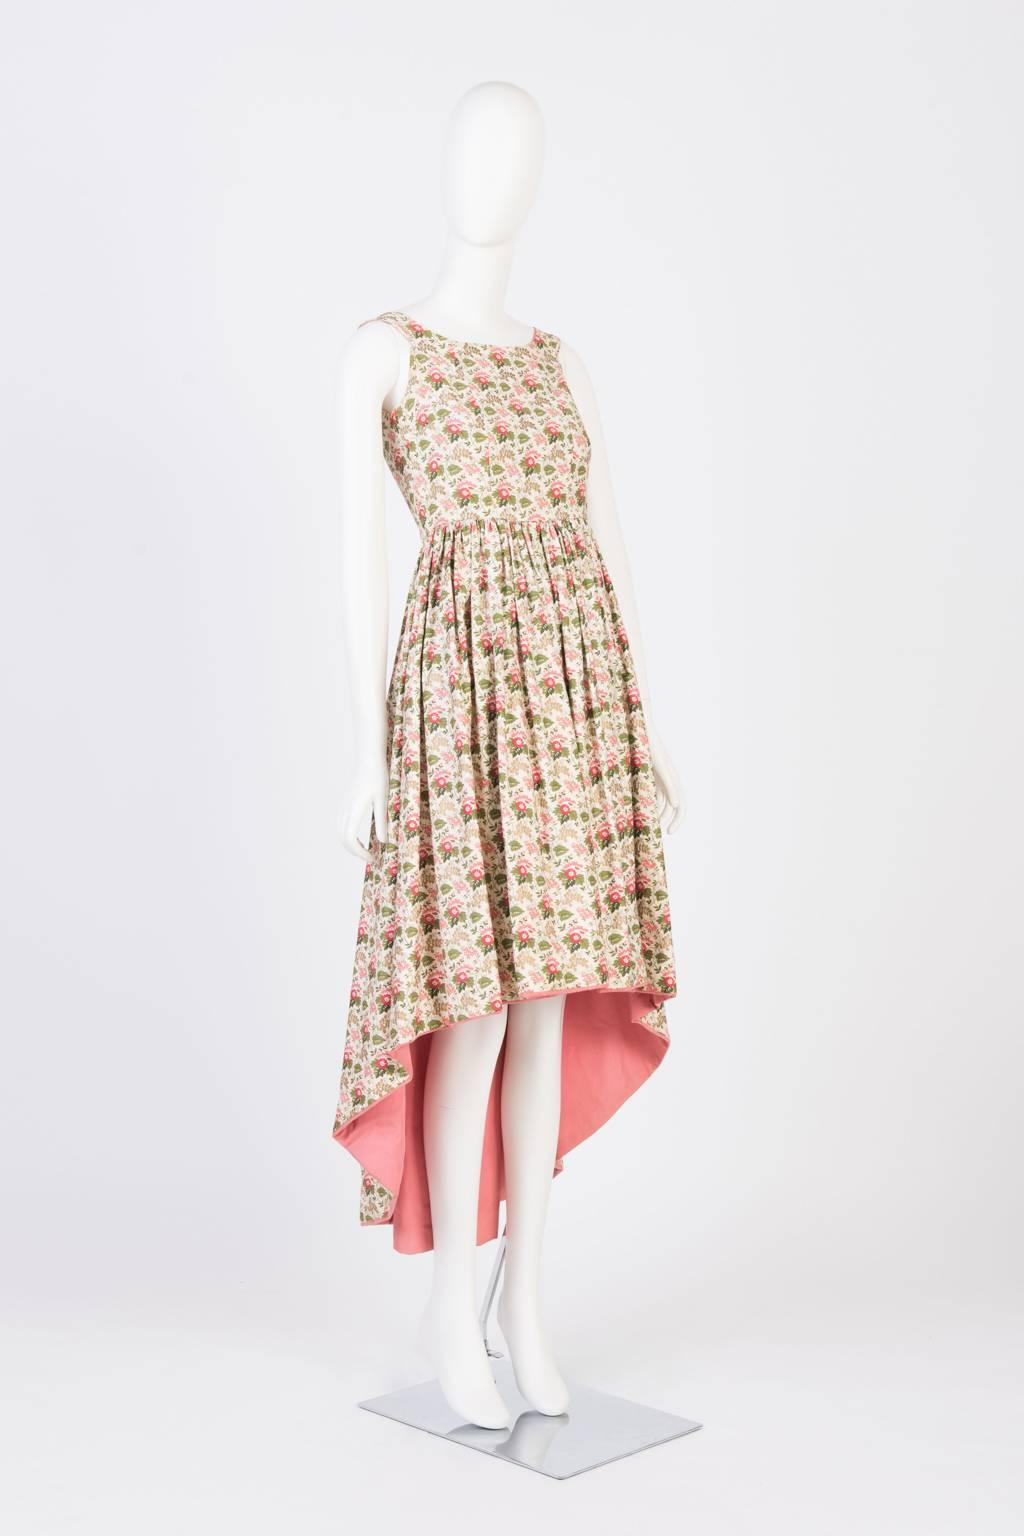 Sleeveless summer dress in floral print with contrast lining (Double cotton) and asymmetrical hem. 